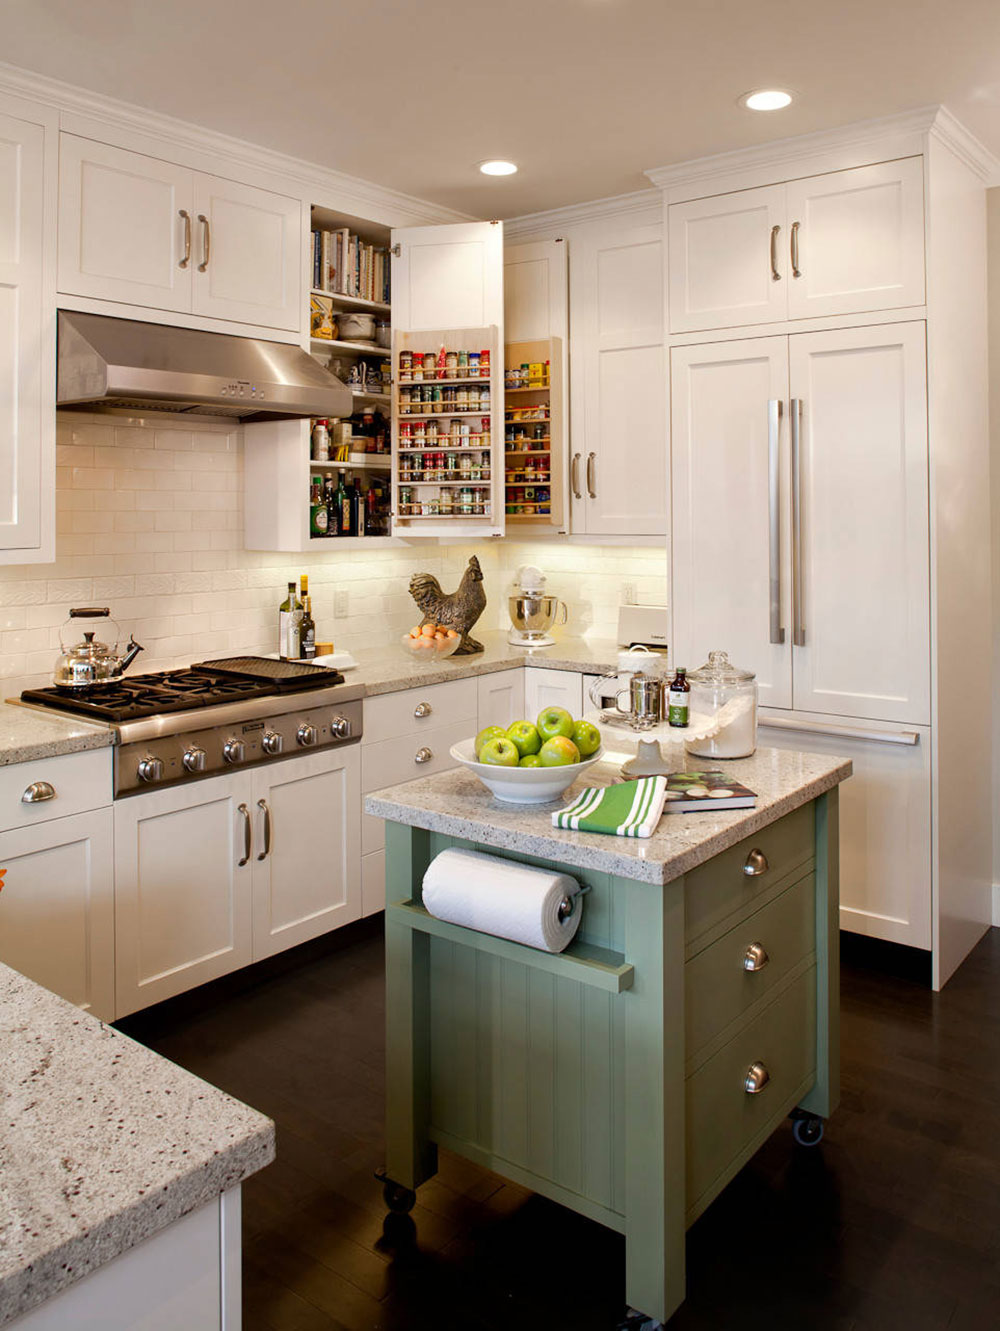 Alive-in-San-Francisco-by-BlueWaterPictures-Dennis-Anderson Great Kitchen Color Schemes with White Cabinets